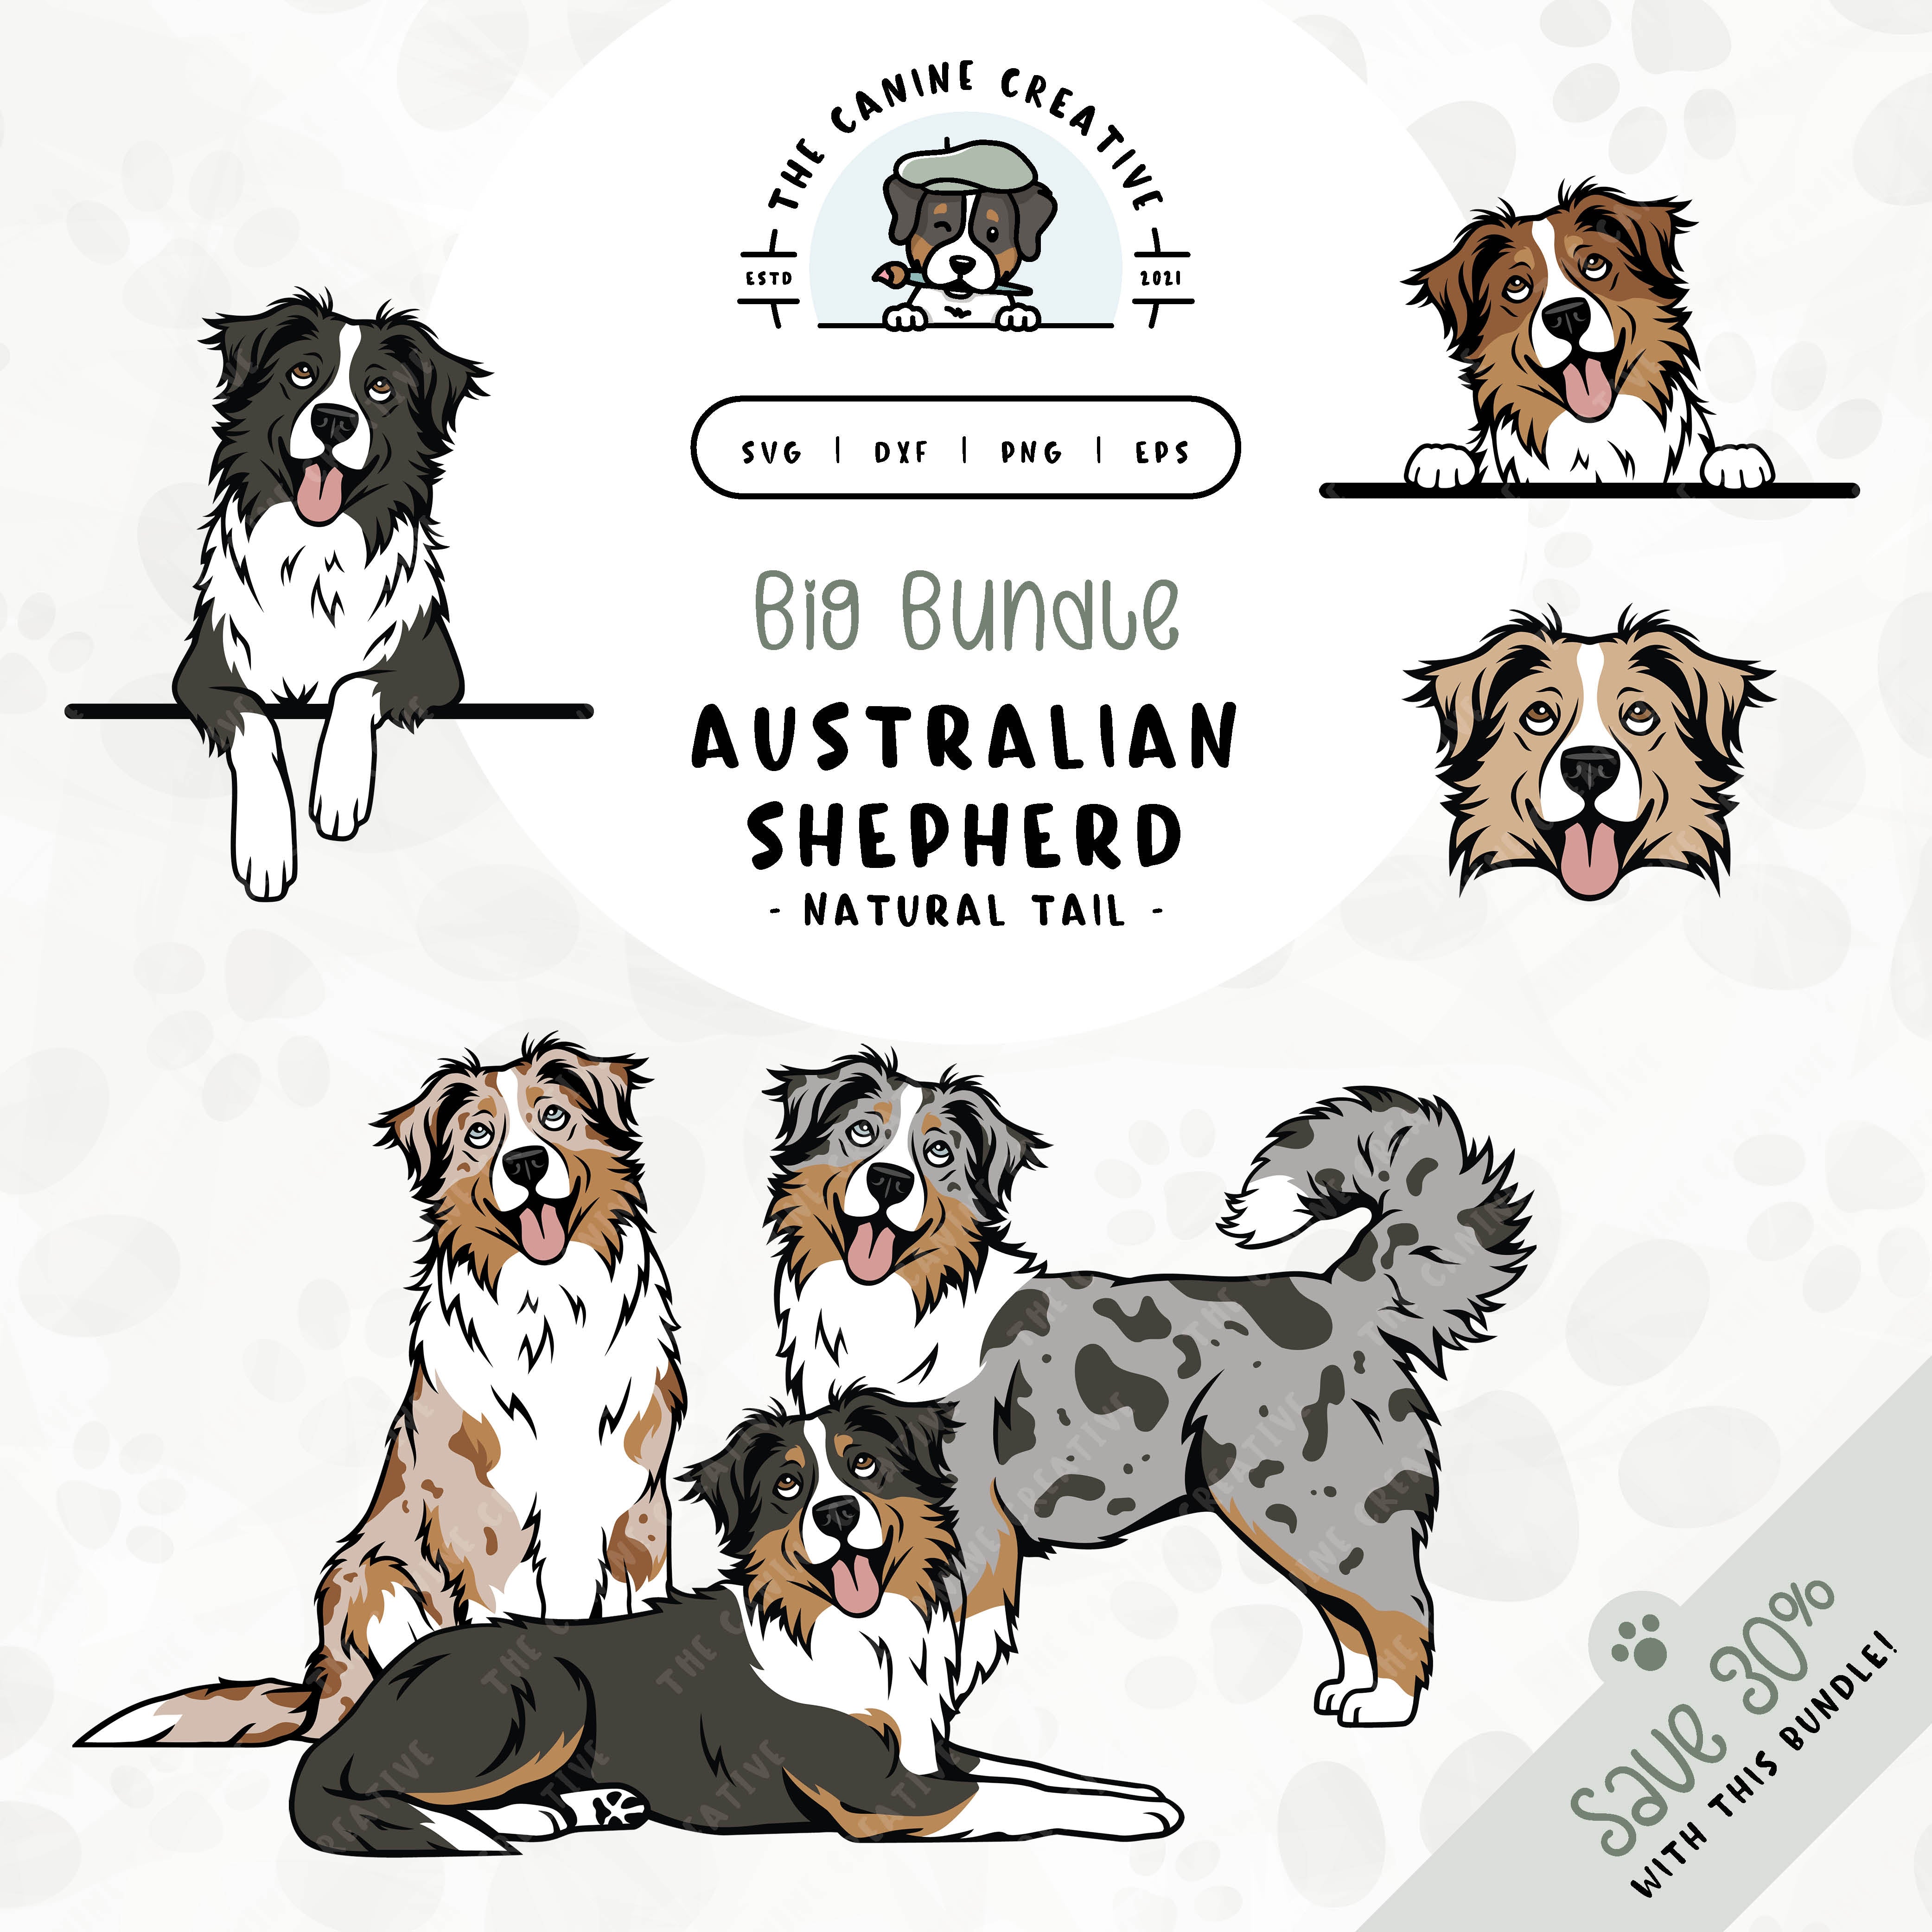 This 6-pack, long tail, Australian Shepherd design bundle includes Aussie faces and five different poses: sitting, standing, laying down, and peeking (2 options). File formats include: SVG, DXF, PNG, and EPS.